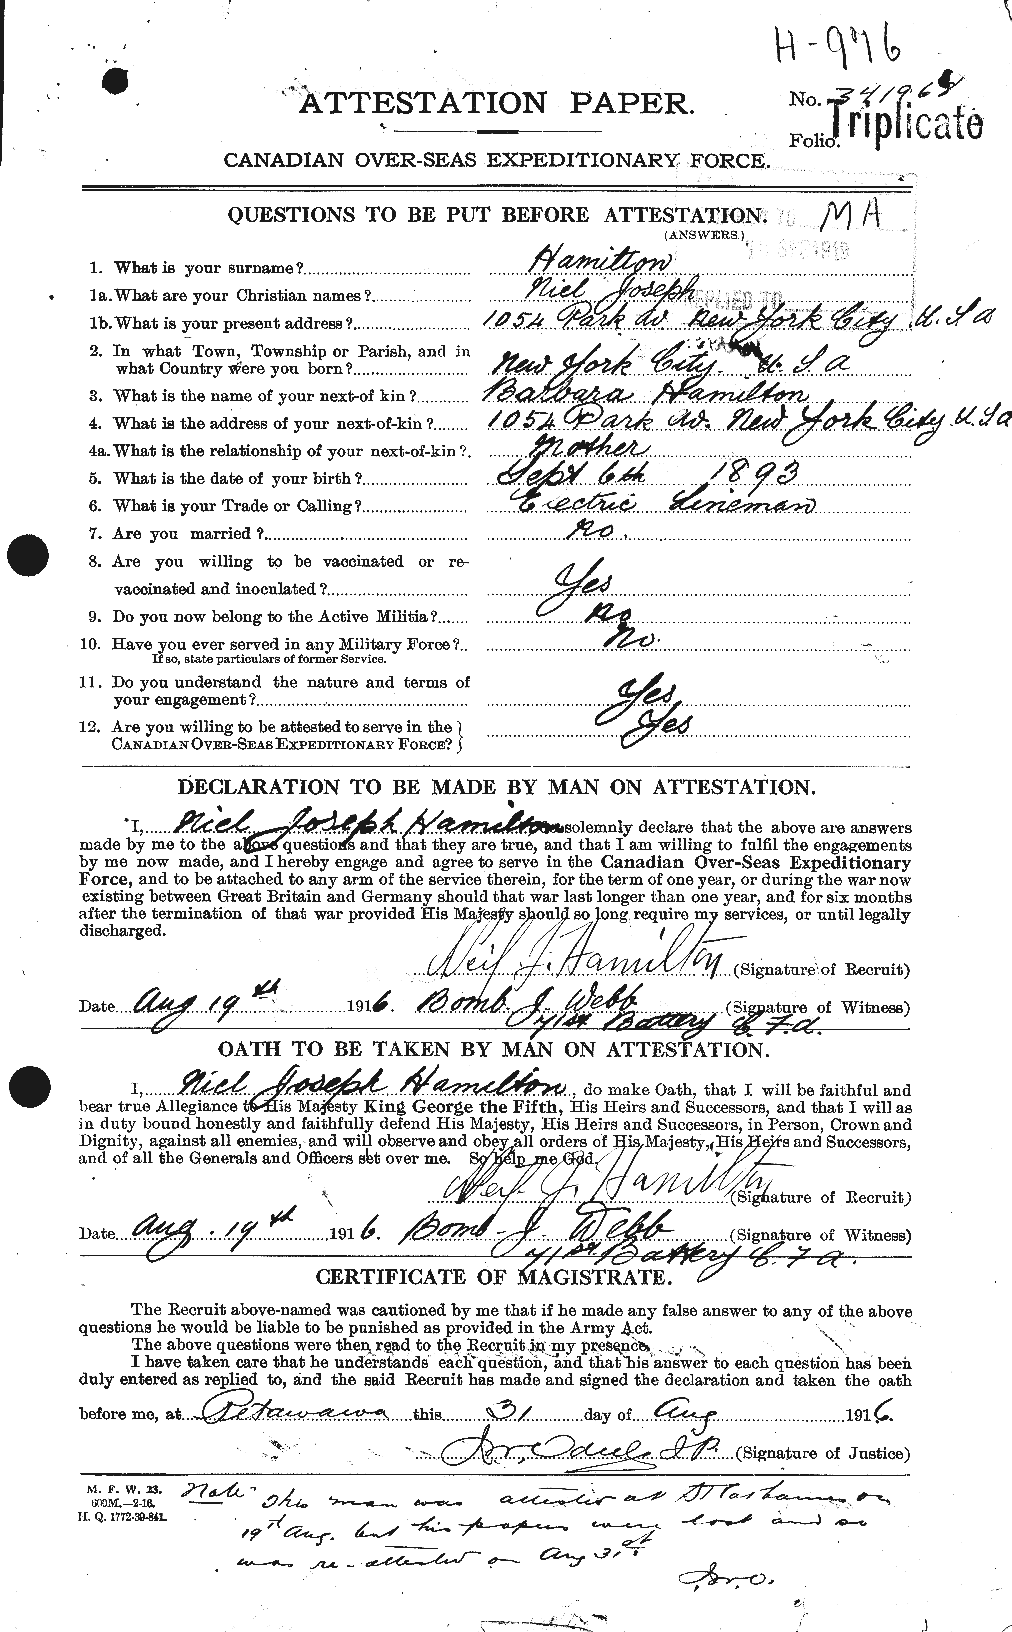 Personnel Records of the First World War - CEF 373192a